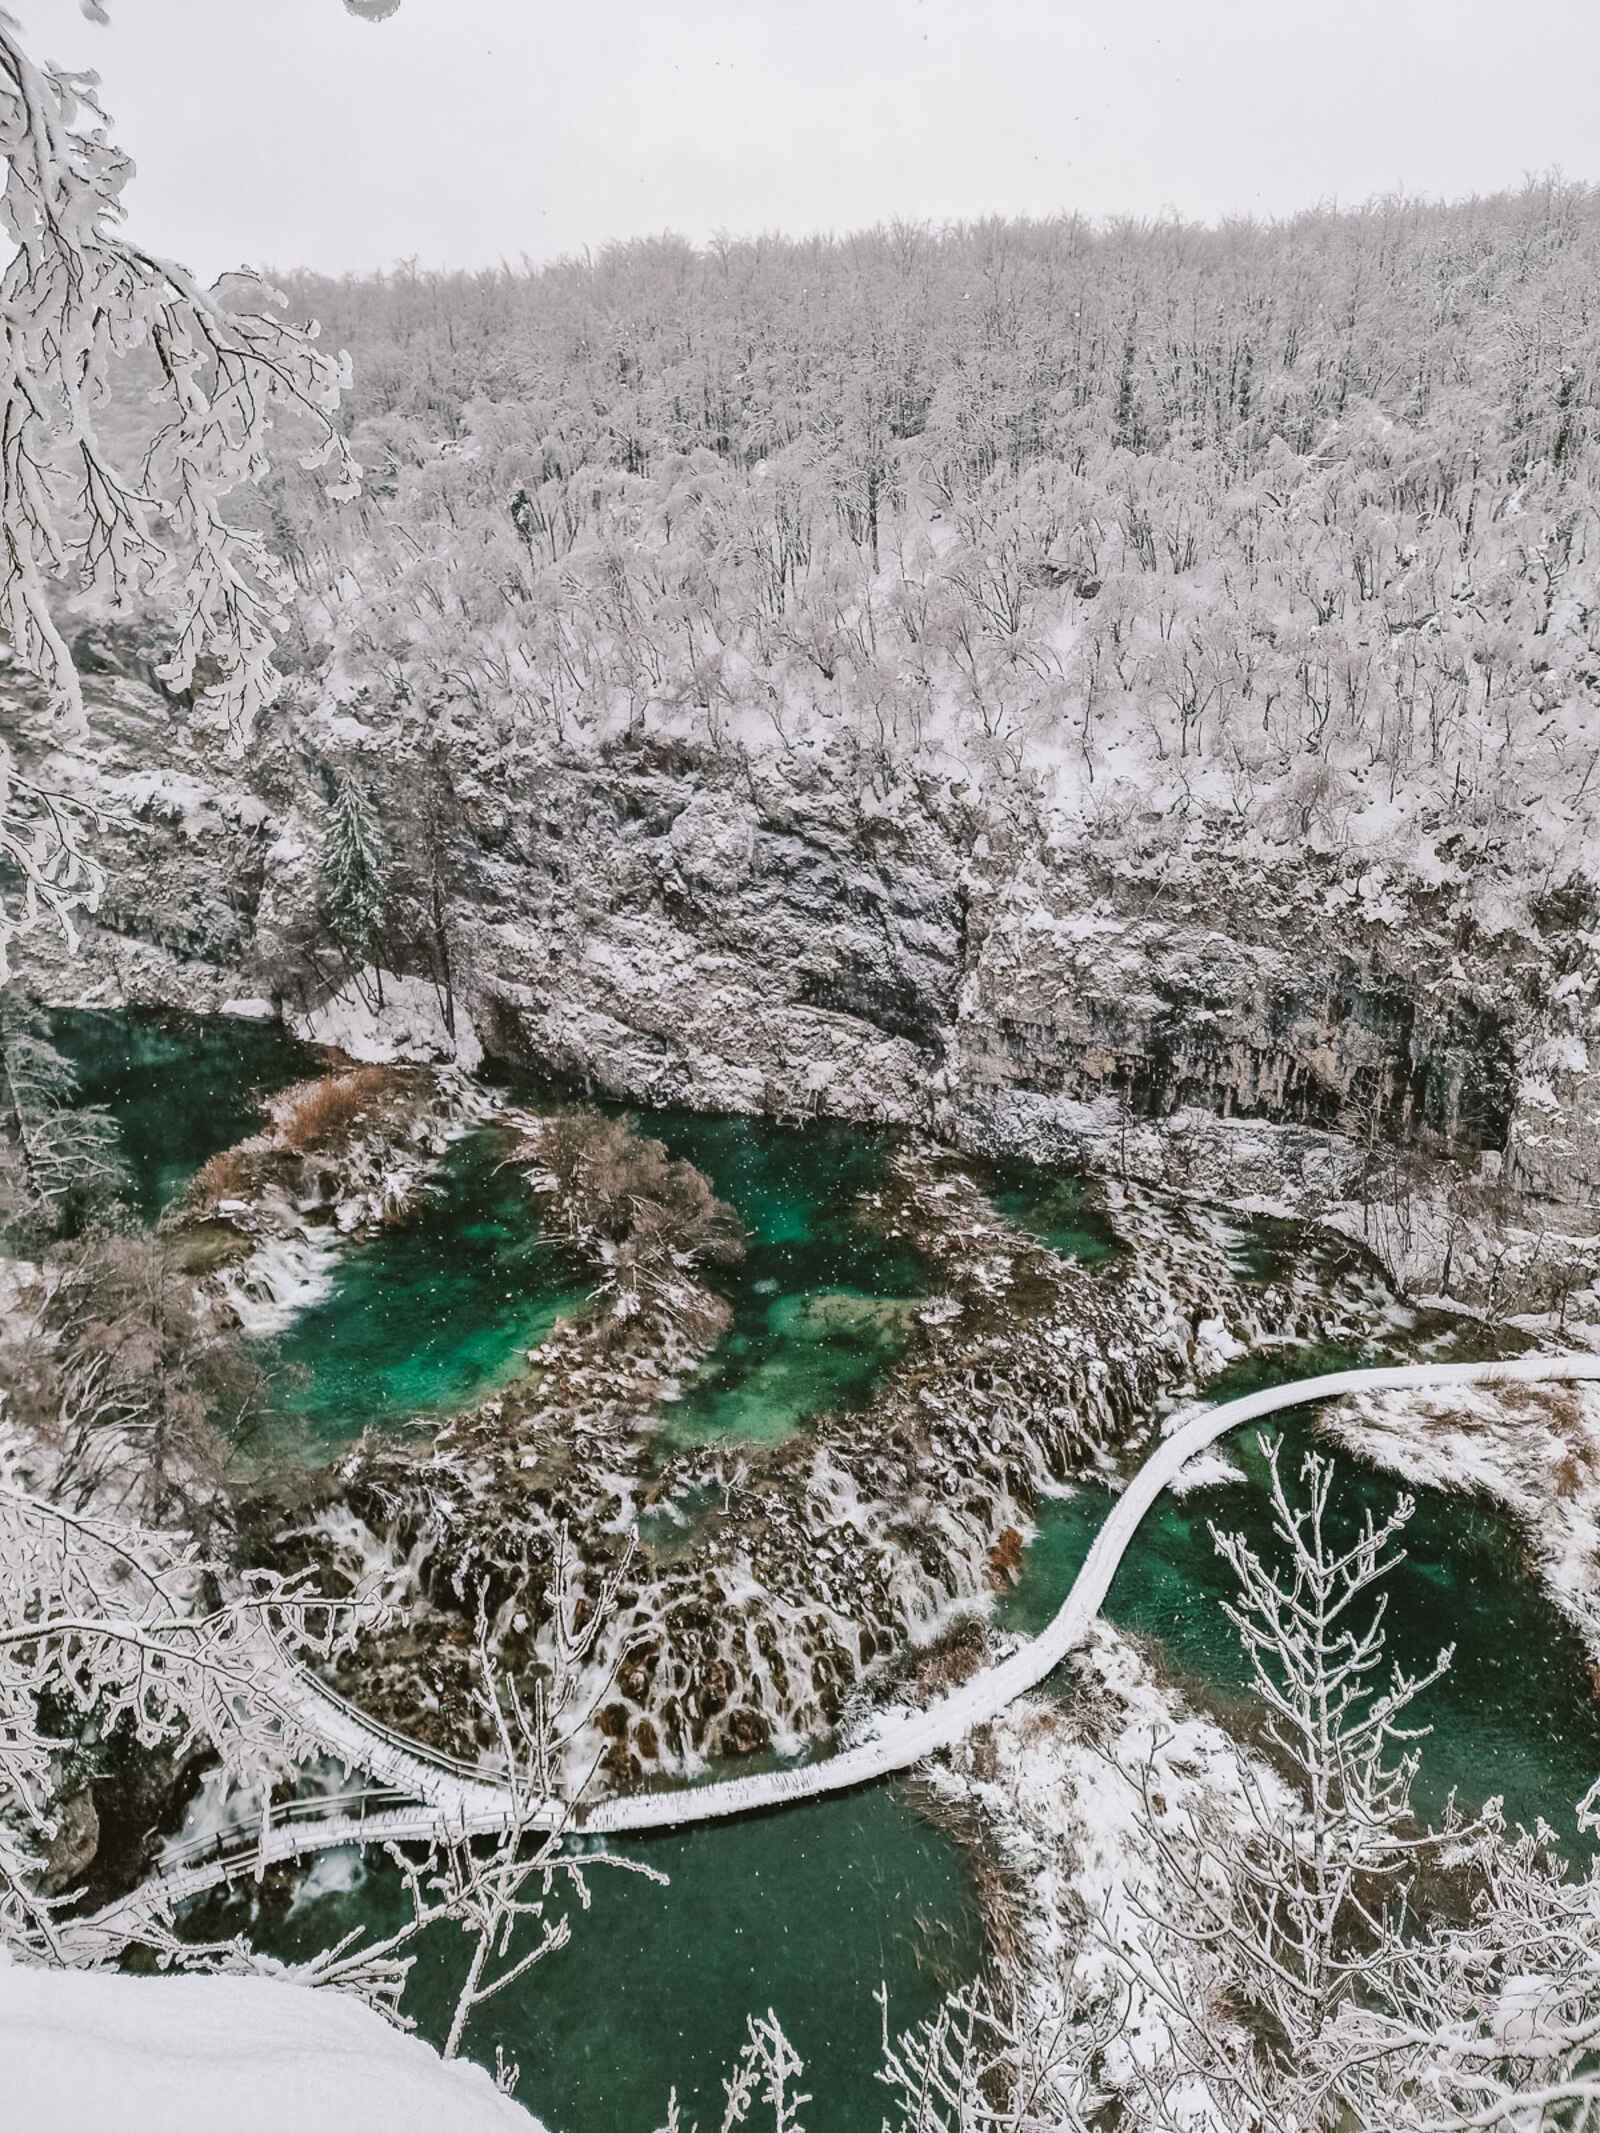 View from above on a canyon trail looing down into the canyon where green lakes flow over rocks and around a snow covered walkway with snowy trees and cliffs either side of the water in Plitvice Lakes National Park, Croatia in winter